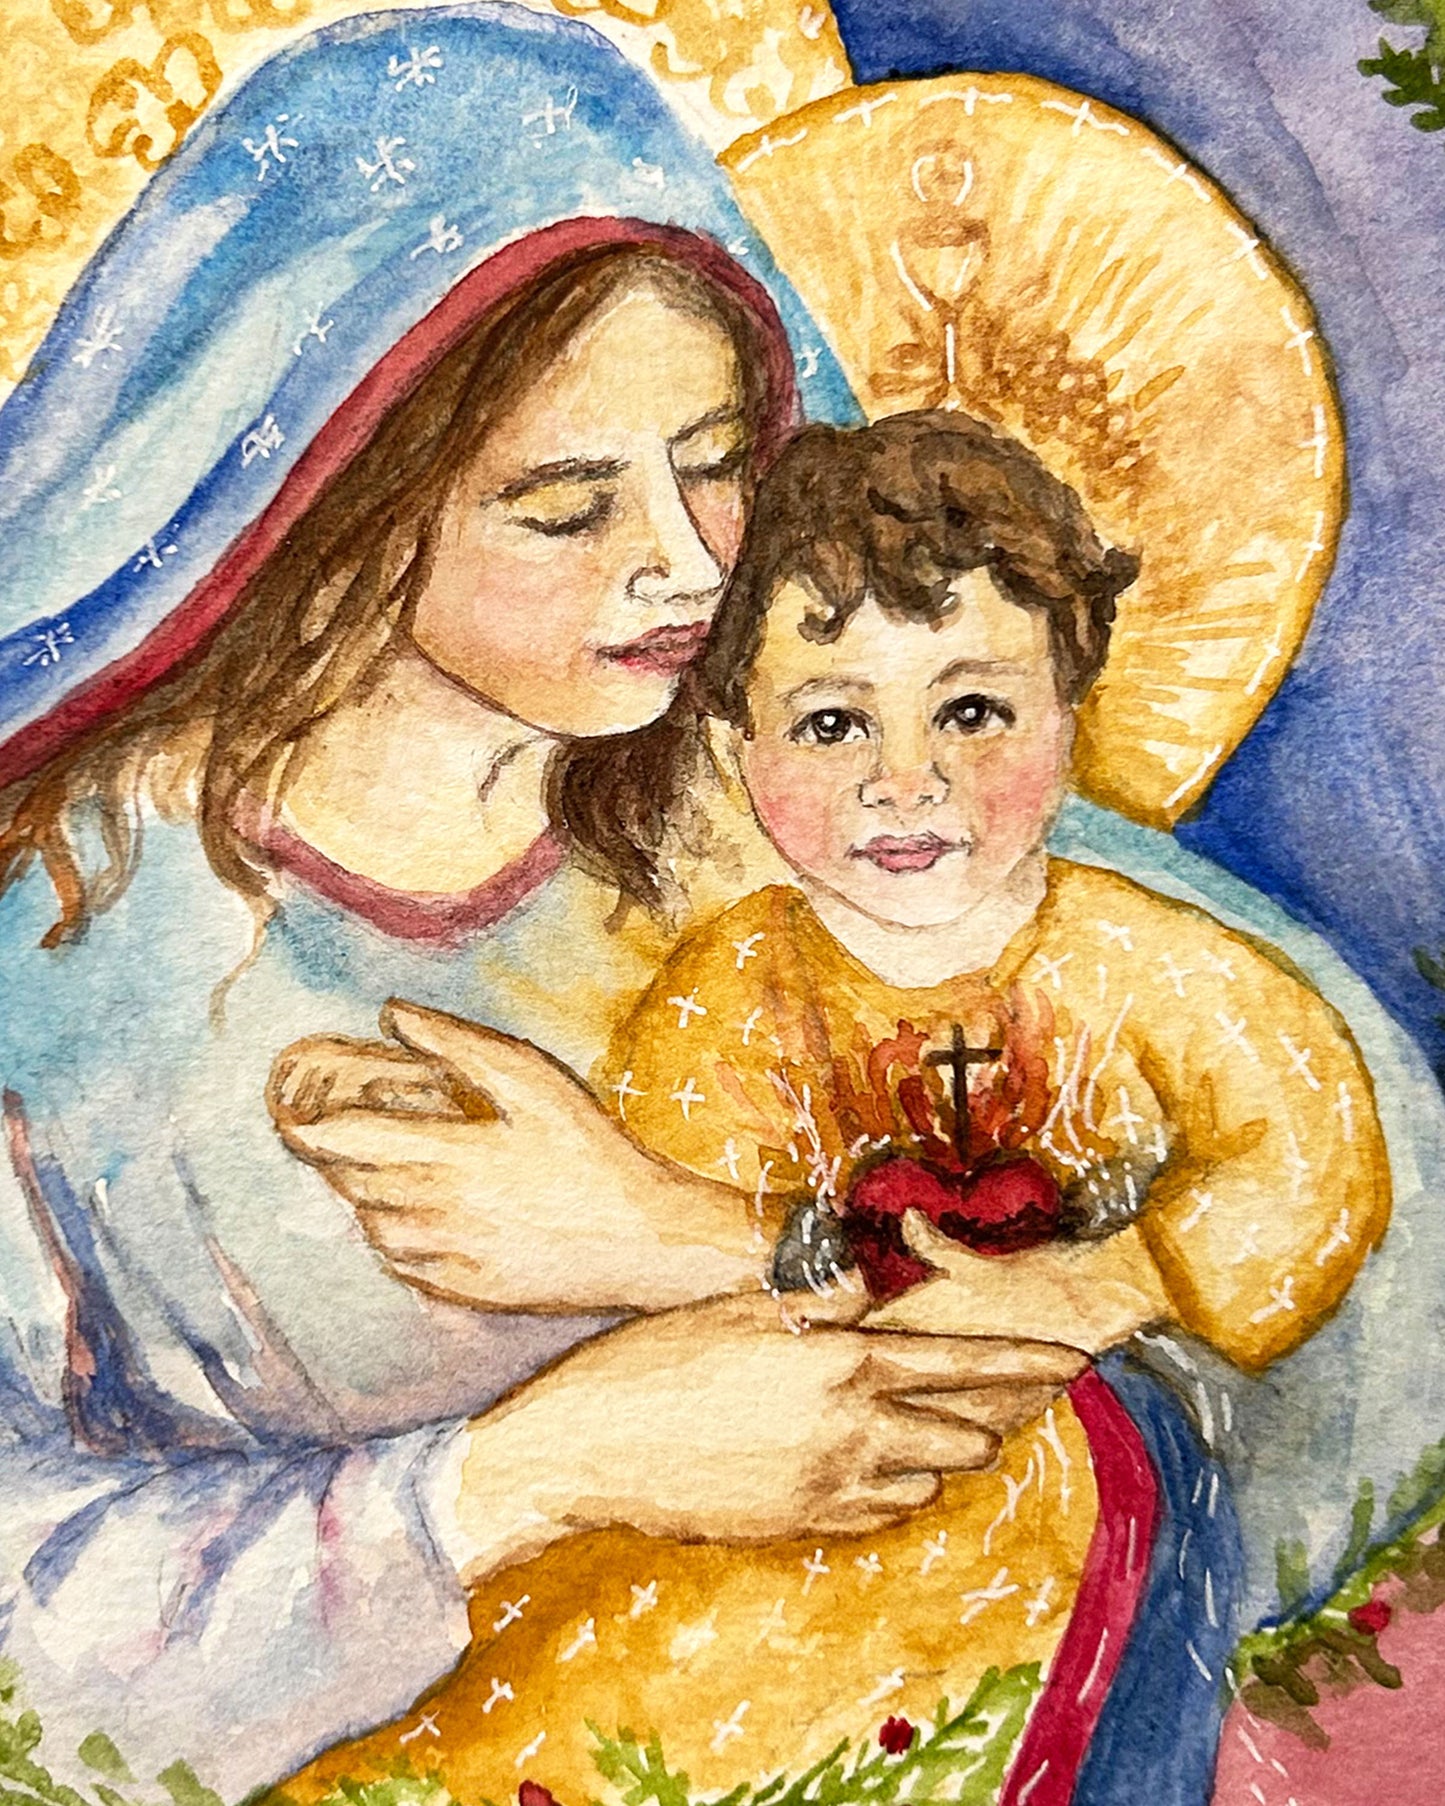 The Merciful Heart of the Christ Child Painting